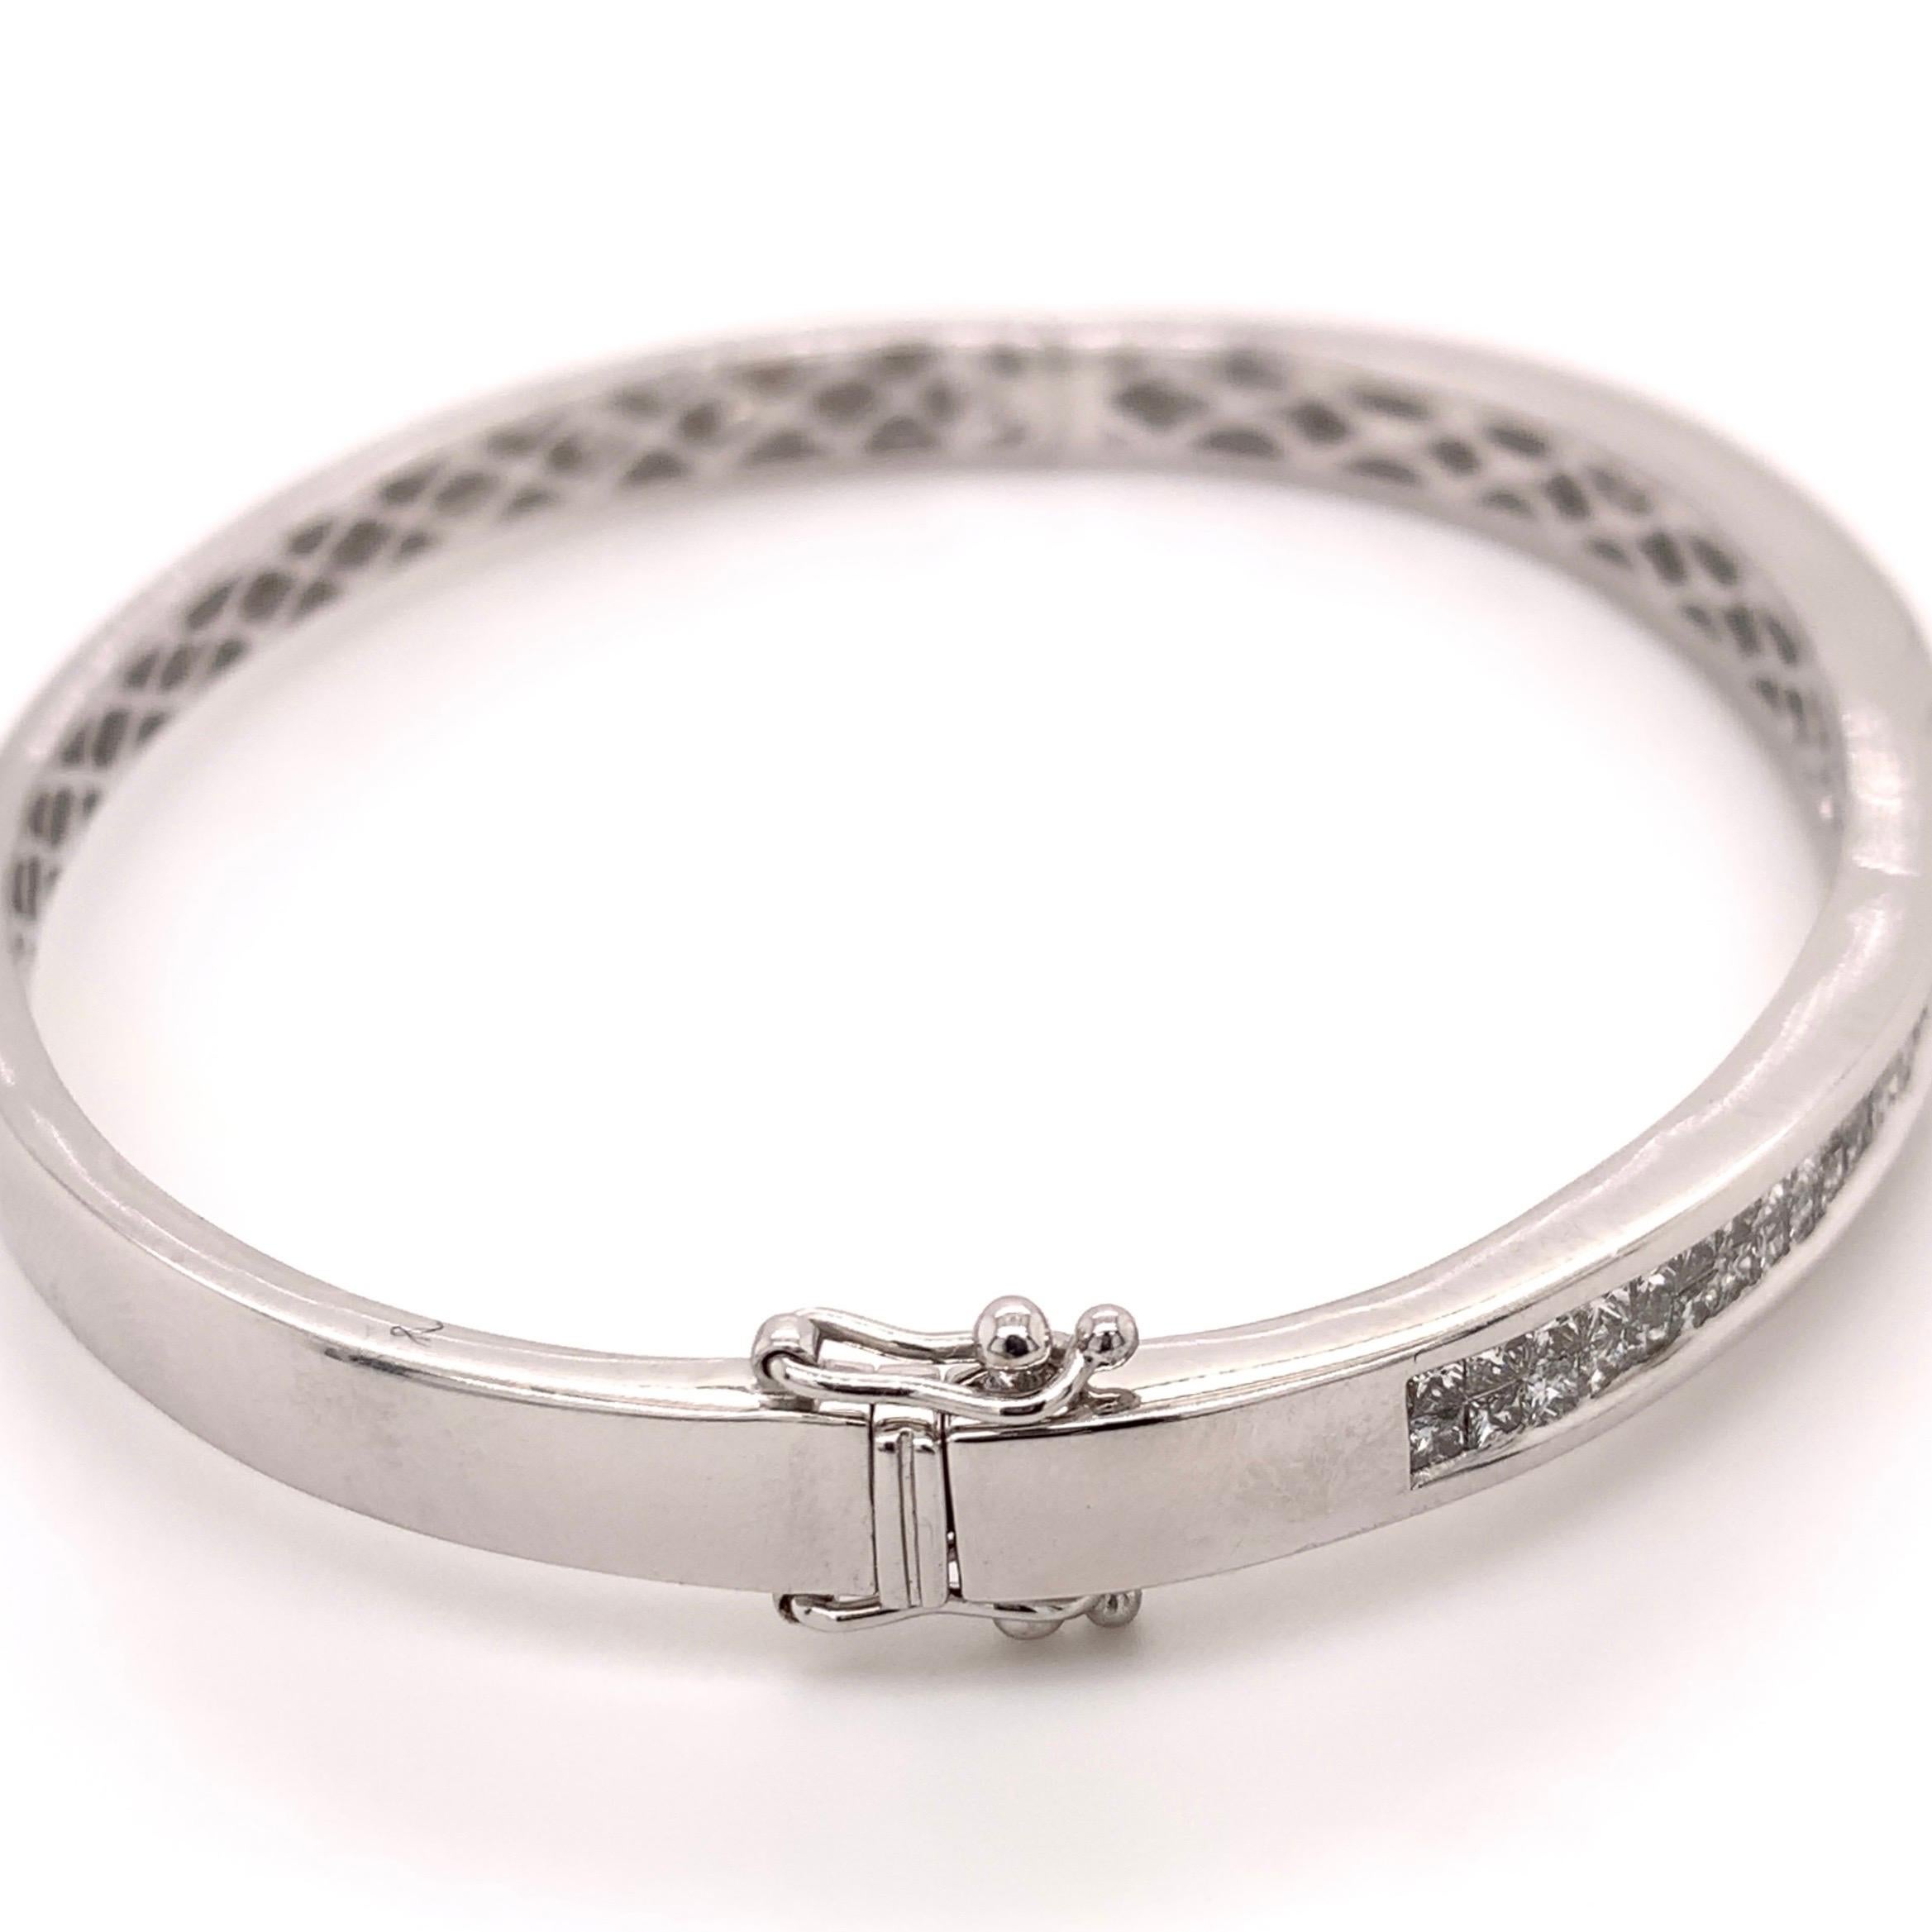 Classic white gold diamond bangle. Sparkling 1.75 carats princess cut diamonds mounted in an invisible setting. Handcrafted two rows of cluster design bangle bracelet set in high polished 14 karats white gold with push box lock and two safety